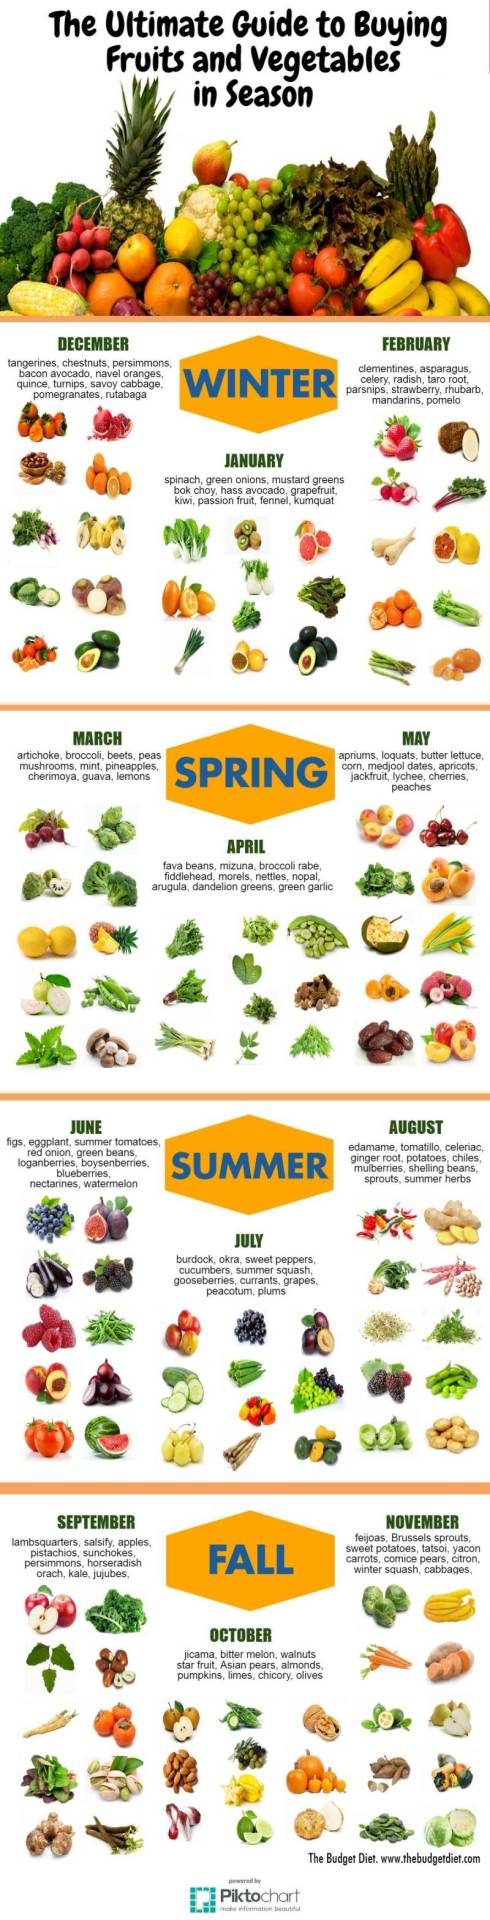 What-Fruits-and-Vegetables-are-in-Season-infographic-plaza